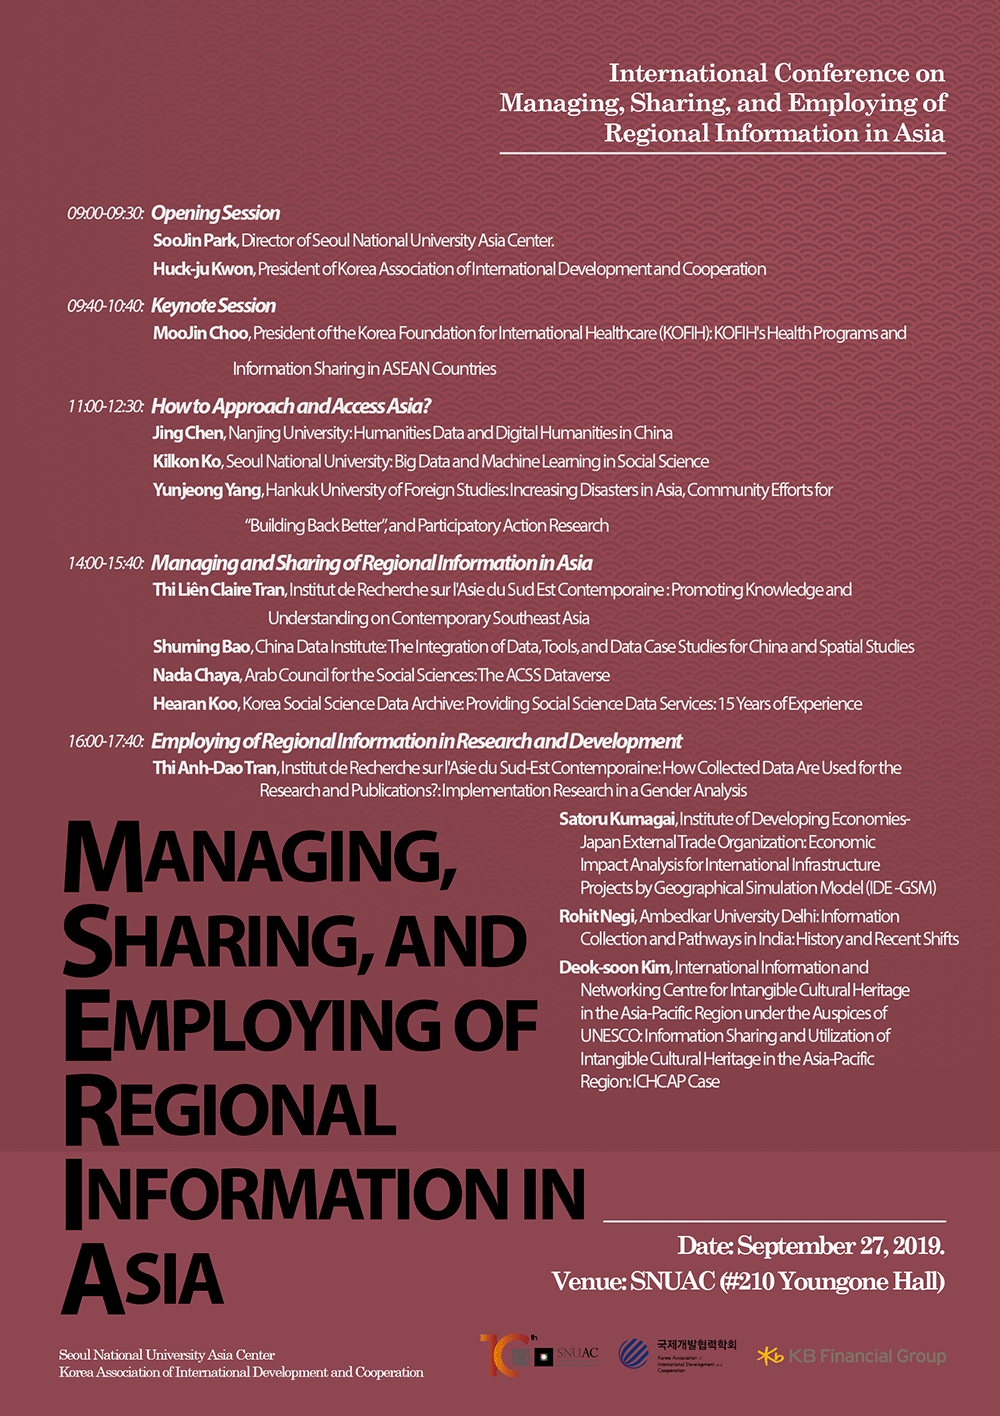 Managing, Sharing, and Employing of Regional Information in Asia